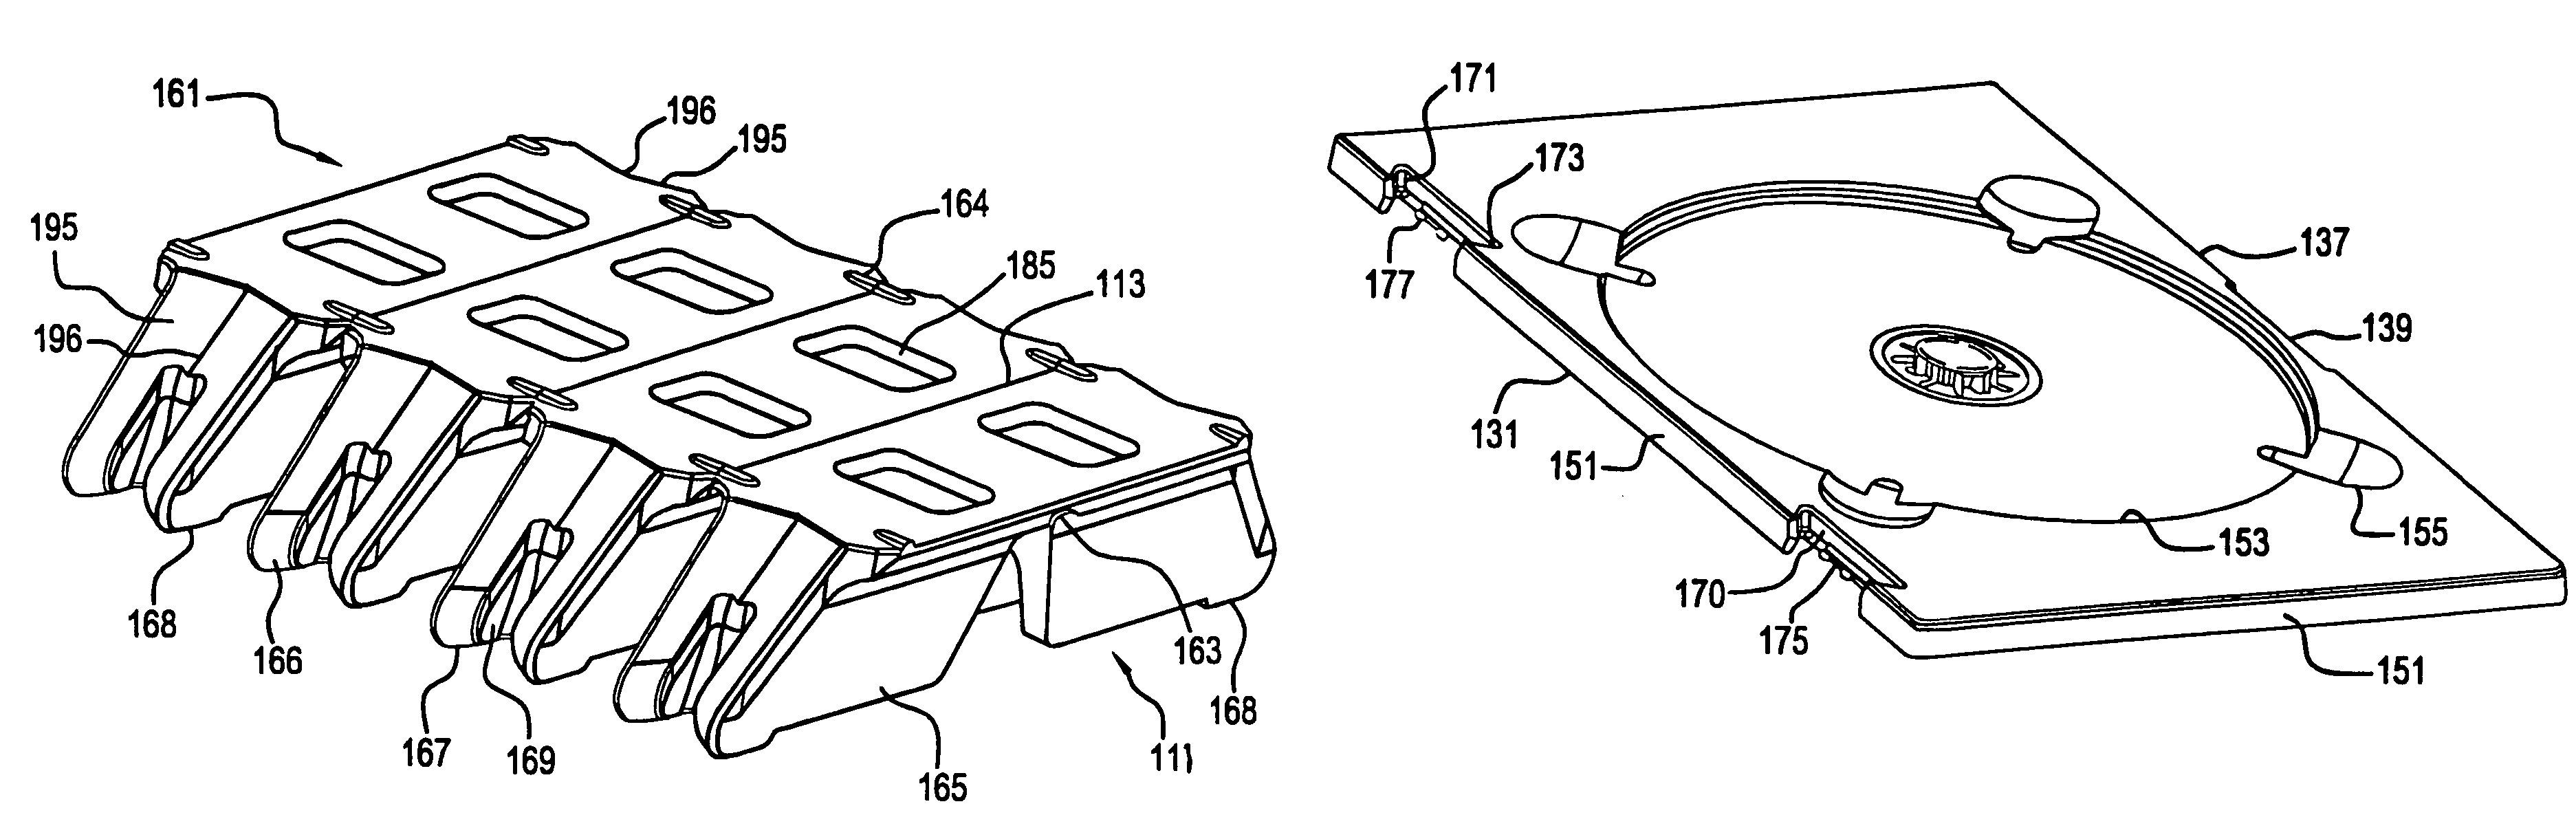 Mechanical attachment for packaging